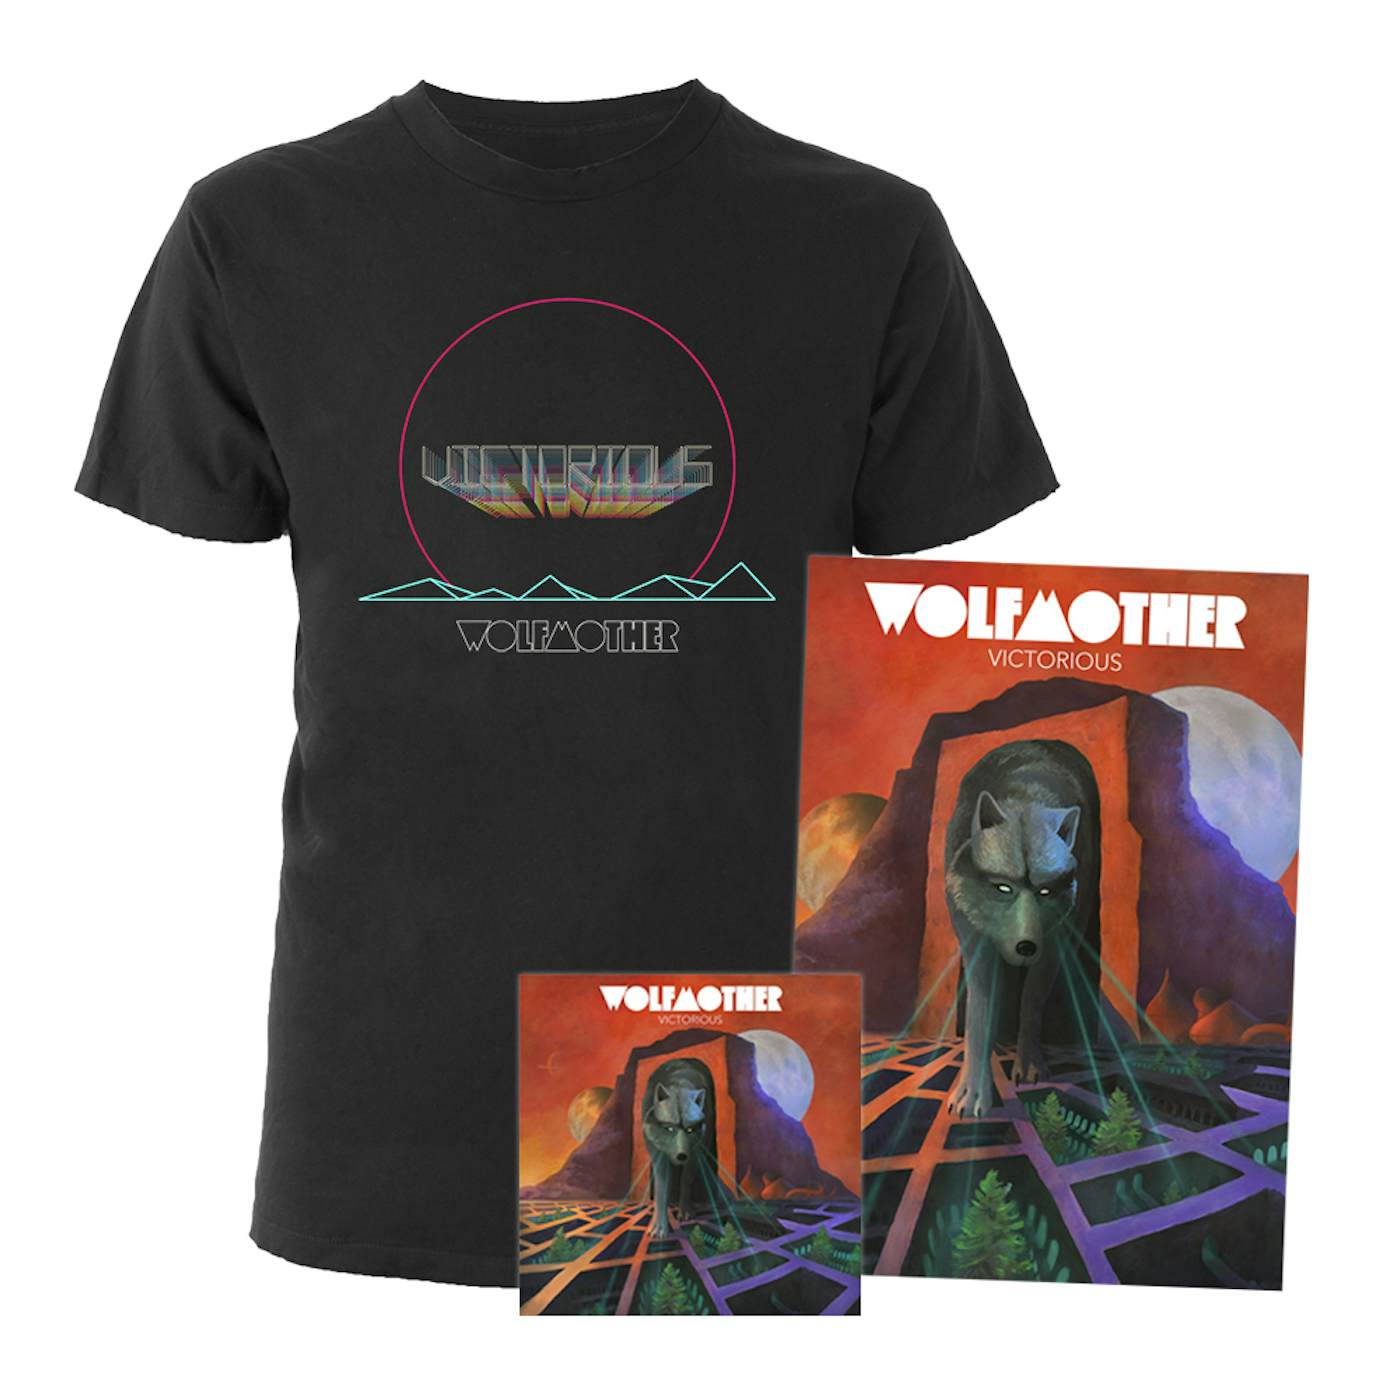 Wolfmother Victorious Tee + Litho + CD